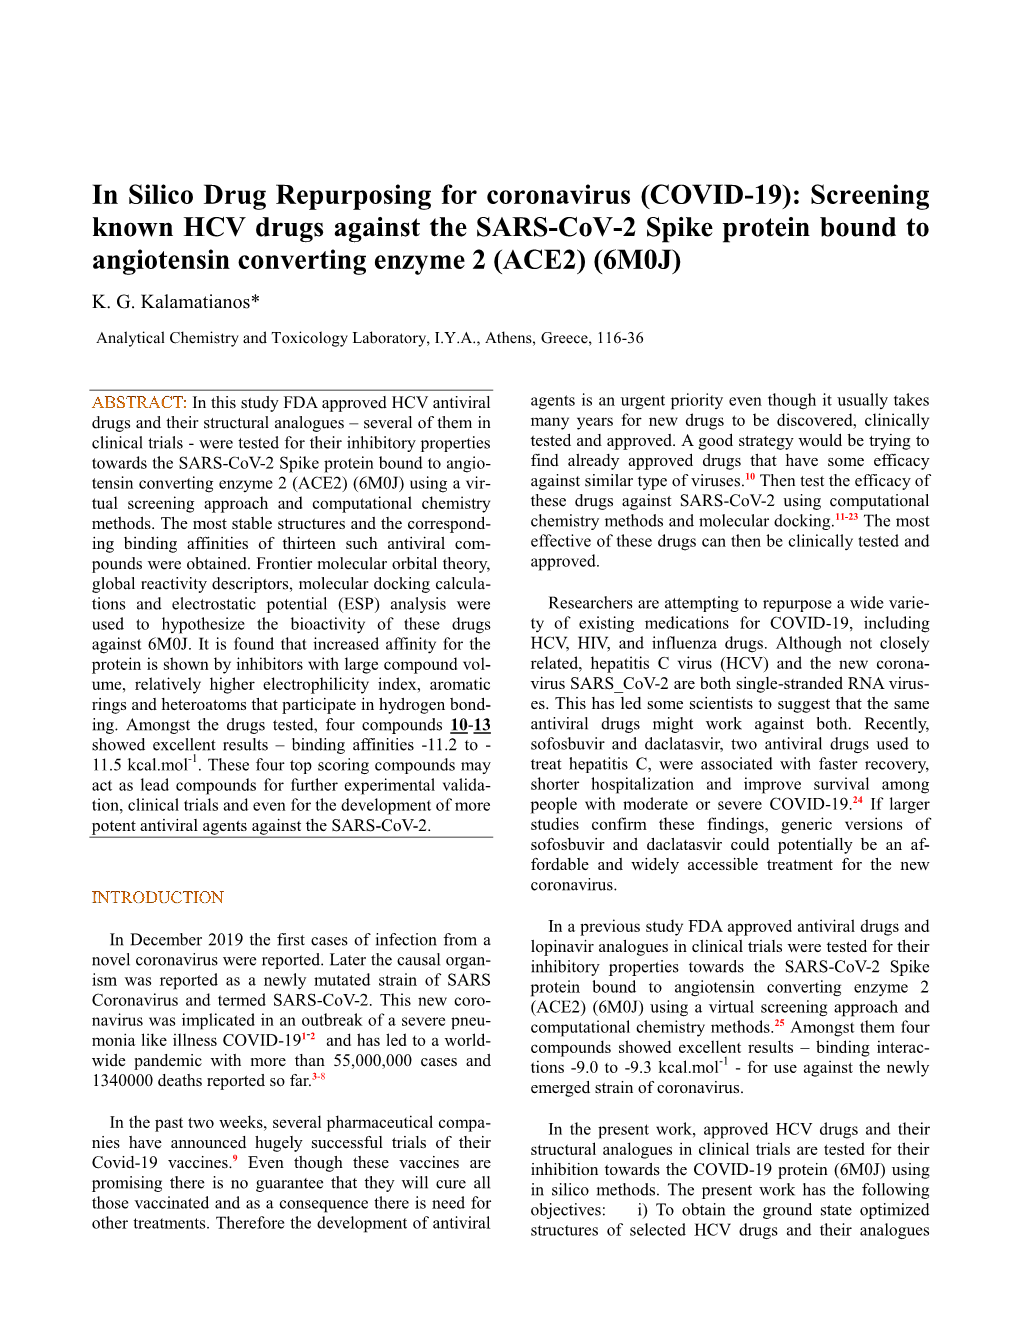 Screening Known HCV Drugs Against the SARS-Cov-2 Spike Protein Bound to Angiotensin Converting Enzyme 2 (ACE2) (6M0J) K